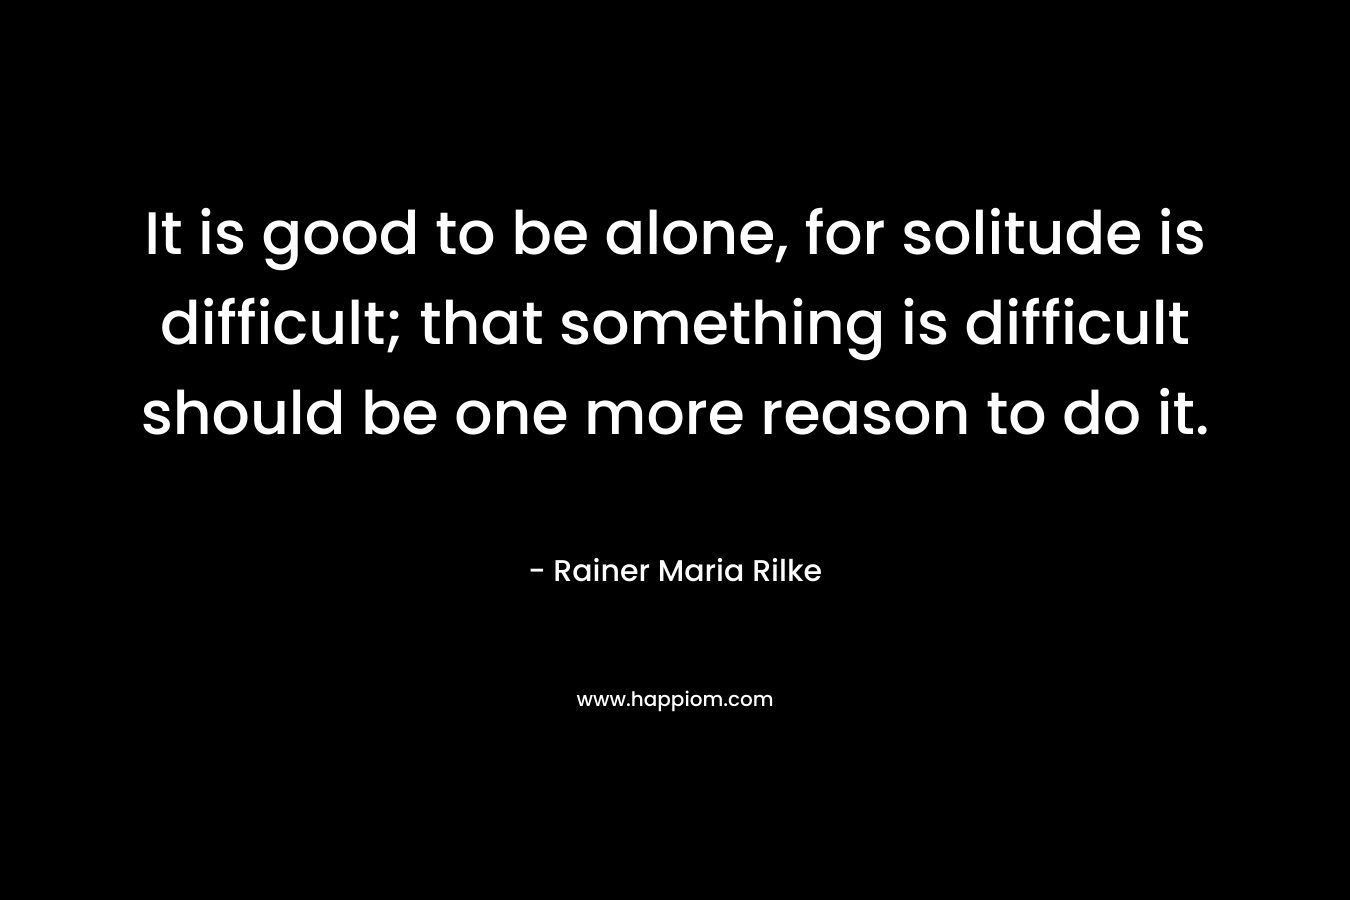 It is good to be alone, for solitude is difficult; that something is difficult should be one more reason to do it.